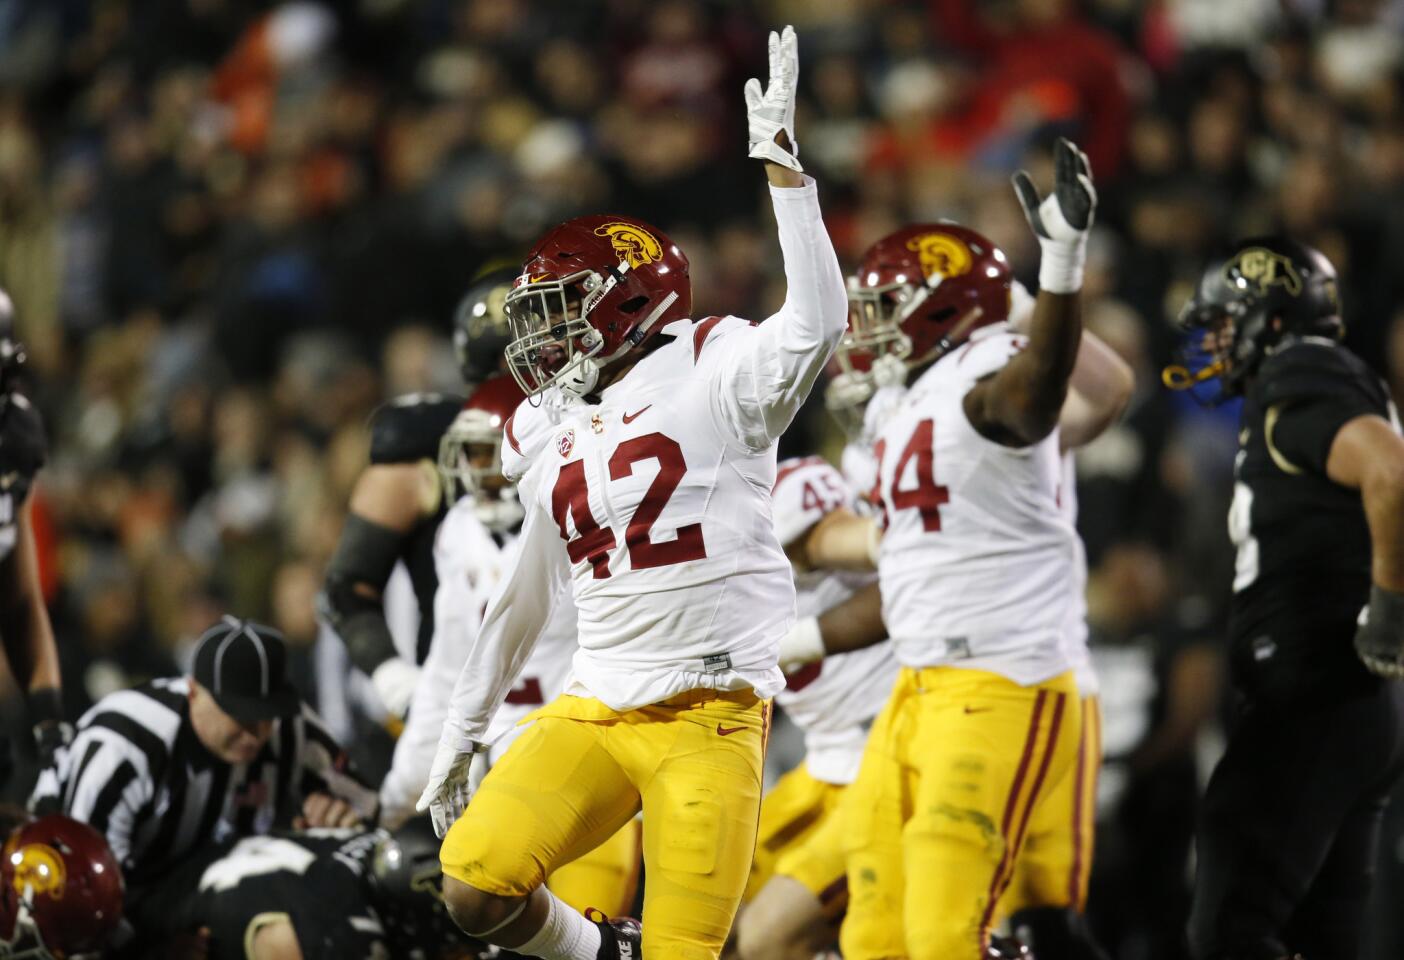 USC moves back into the college football rankings